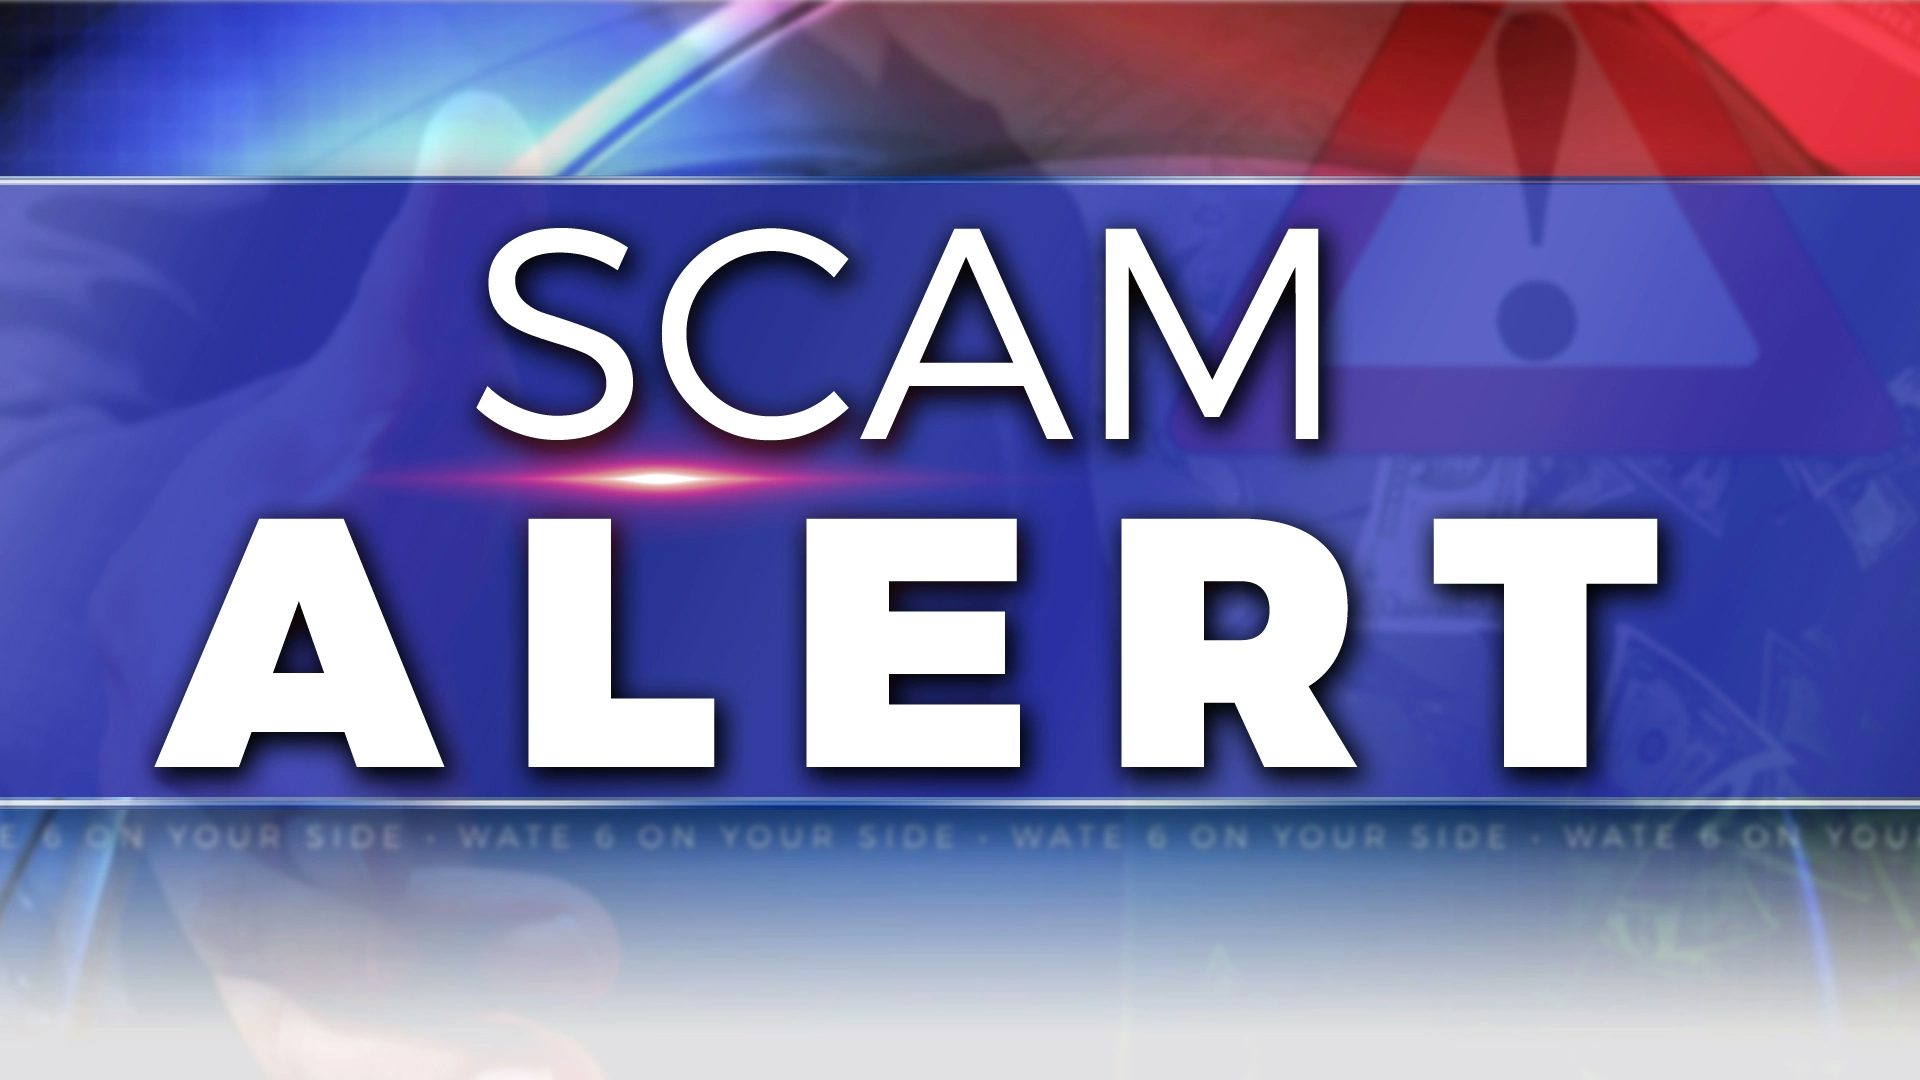 The Owner-Operator Independent Drivers Association is warning truckers of a potential phone scam posing as the U.S. Department of Transportation. image